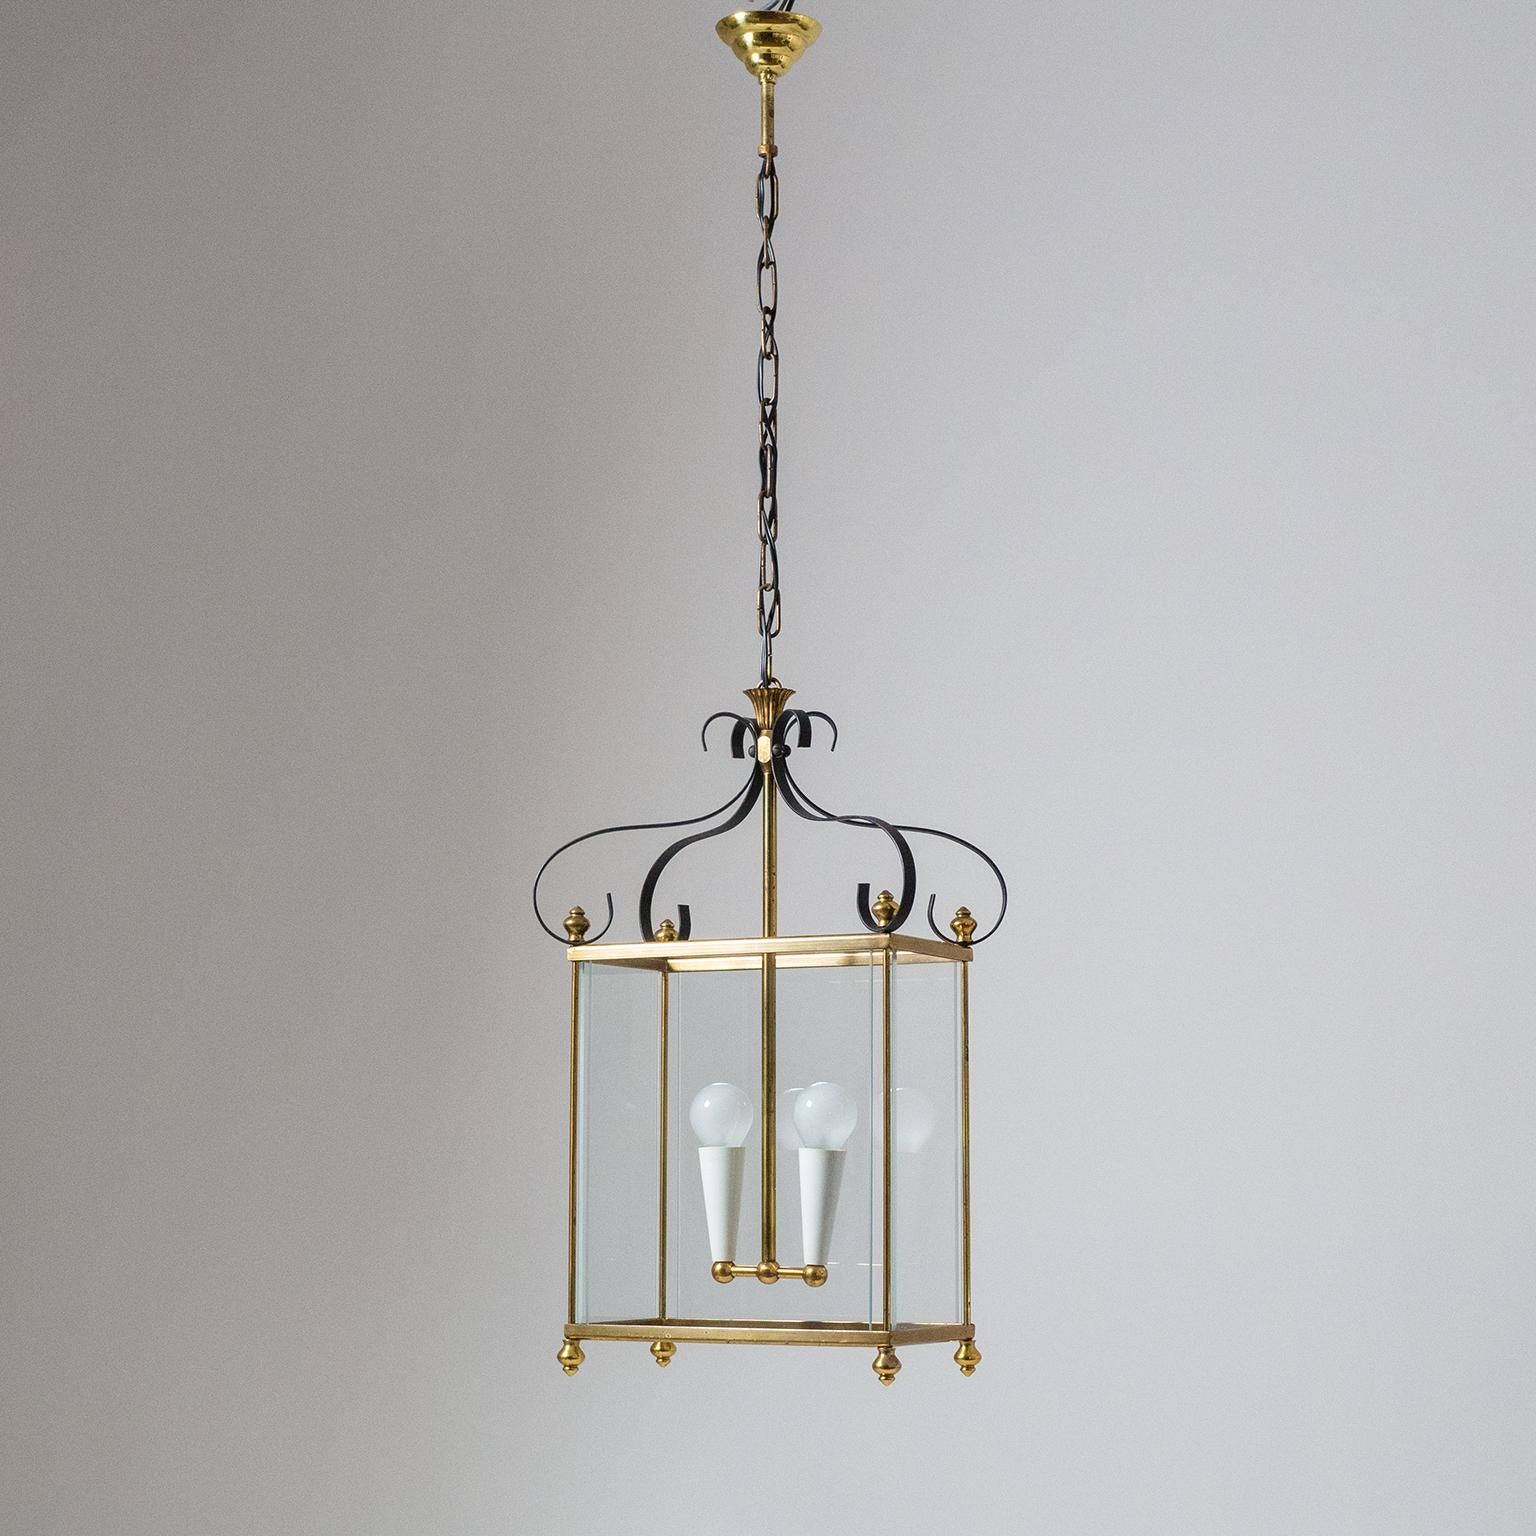 Lovely Italian midcentury brass and glass lantern. The neoclassical lantern shape is reinterpreted with a modernist approach resulting in a very 'light-weight' design. Very nice original condition with a bit of patina on the brass and lacquered